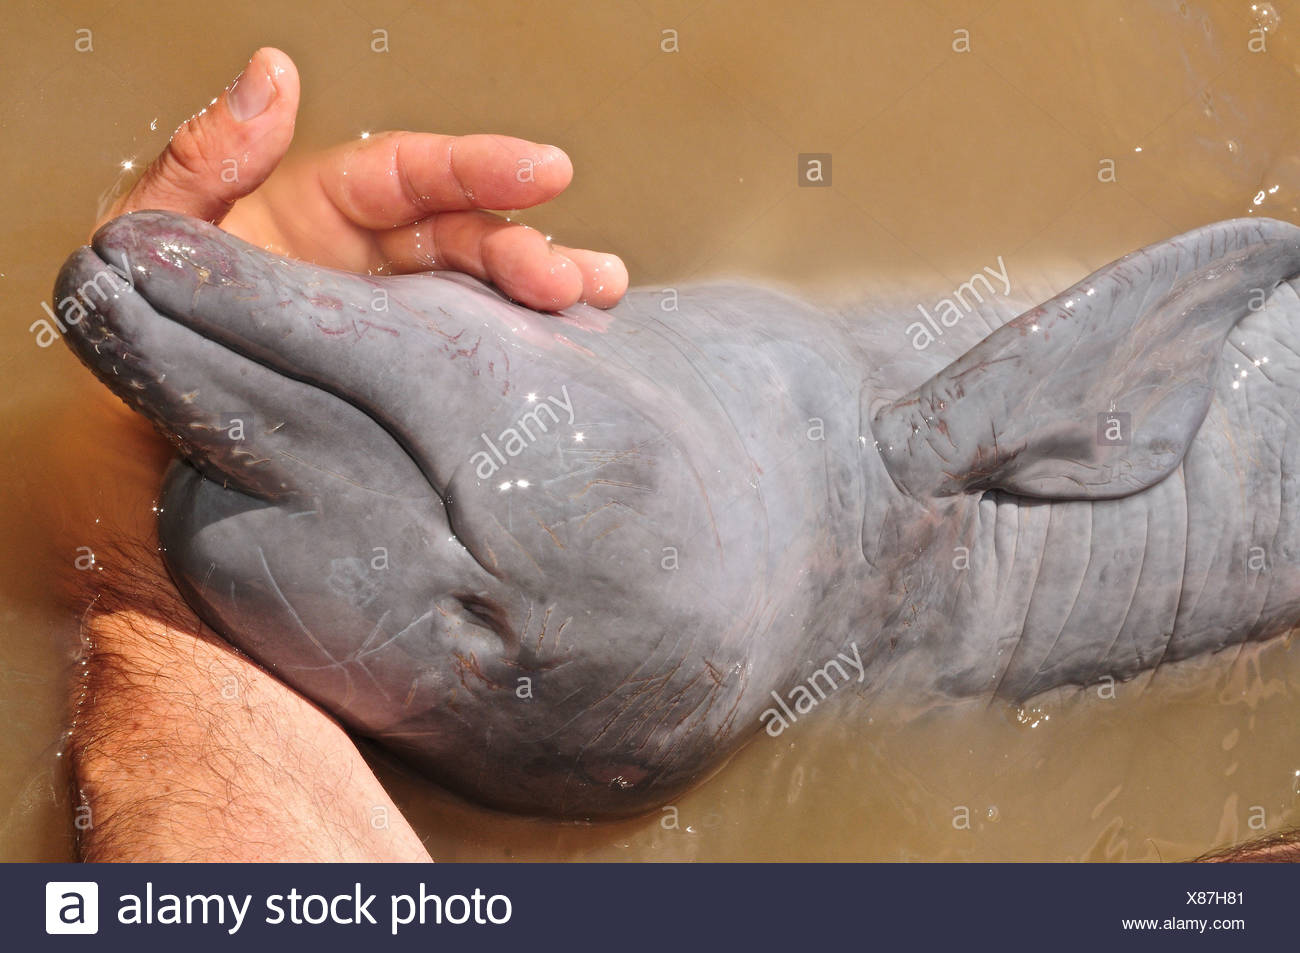 Captive Baby Pink River Dolphin Destined For Illegal Animal Trade Stock Photo Alamy